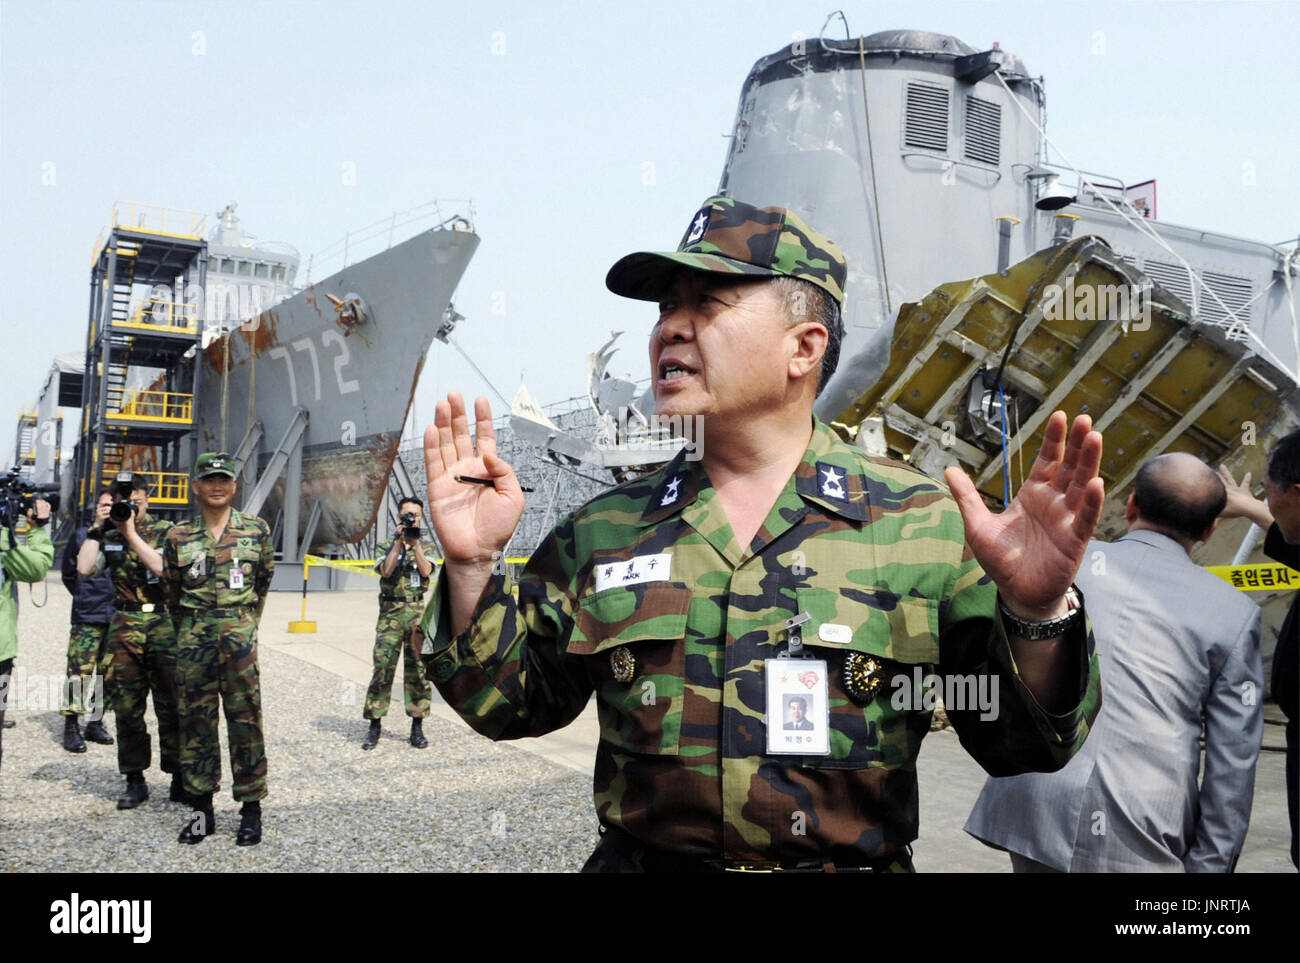 SEOUL, South Korea - A member of a joint investigation team of the South Korean military and the private sector talks about the deadly sinking of the country's naval ship Cheonan near the salvaged ship at a naval base in Gyeonggi Province on May 19, 2010. South Korea officially blamed North Korea the following day for the sinking of the warship that killed 46 sailors. (Kyodo) Stock Photo